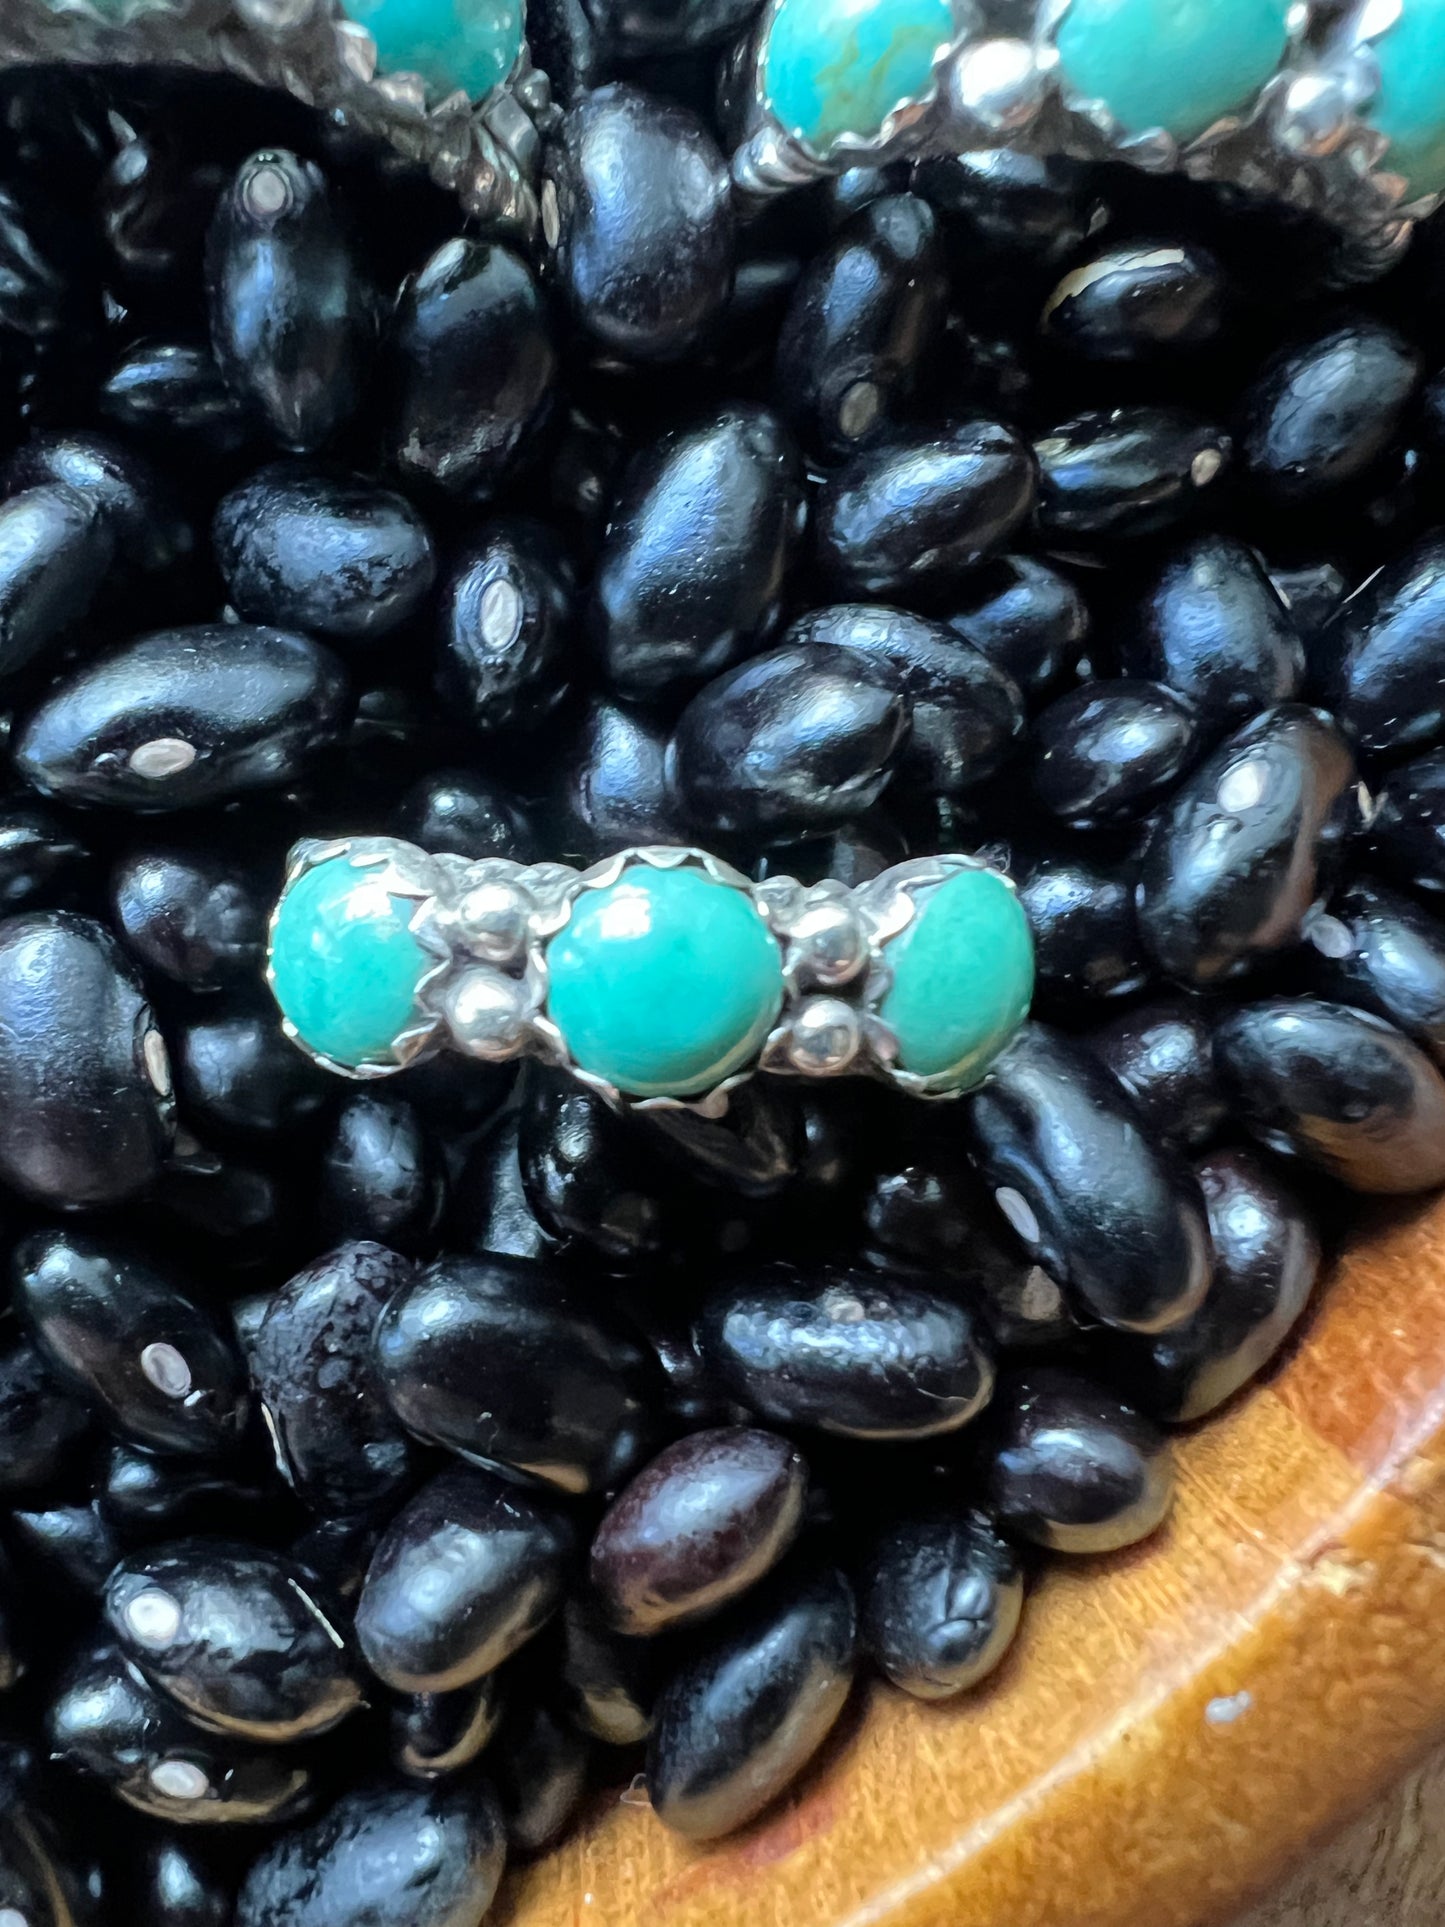 Turquoise Triple Stone Ring